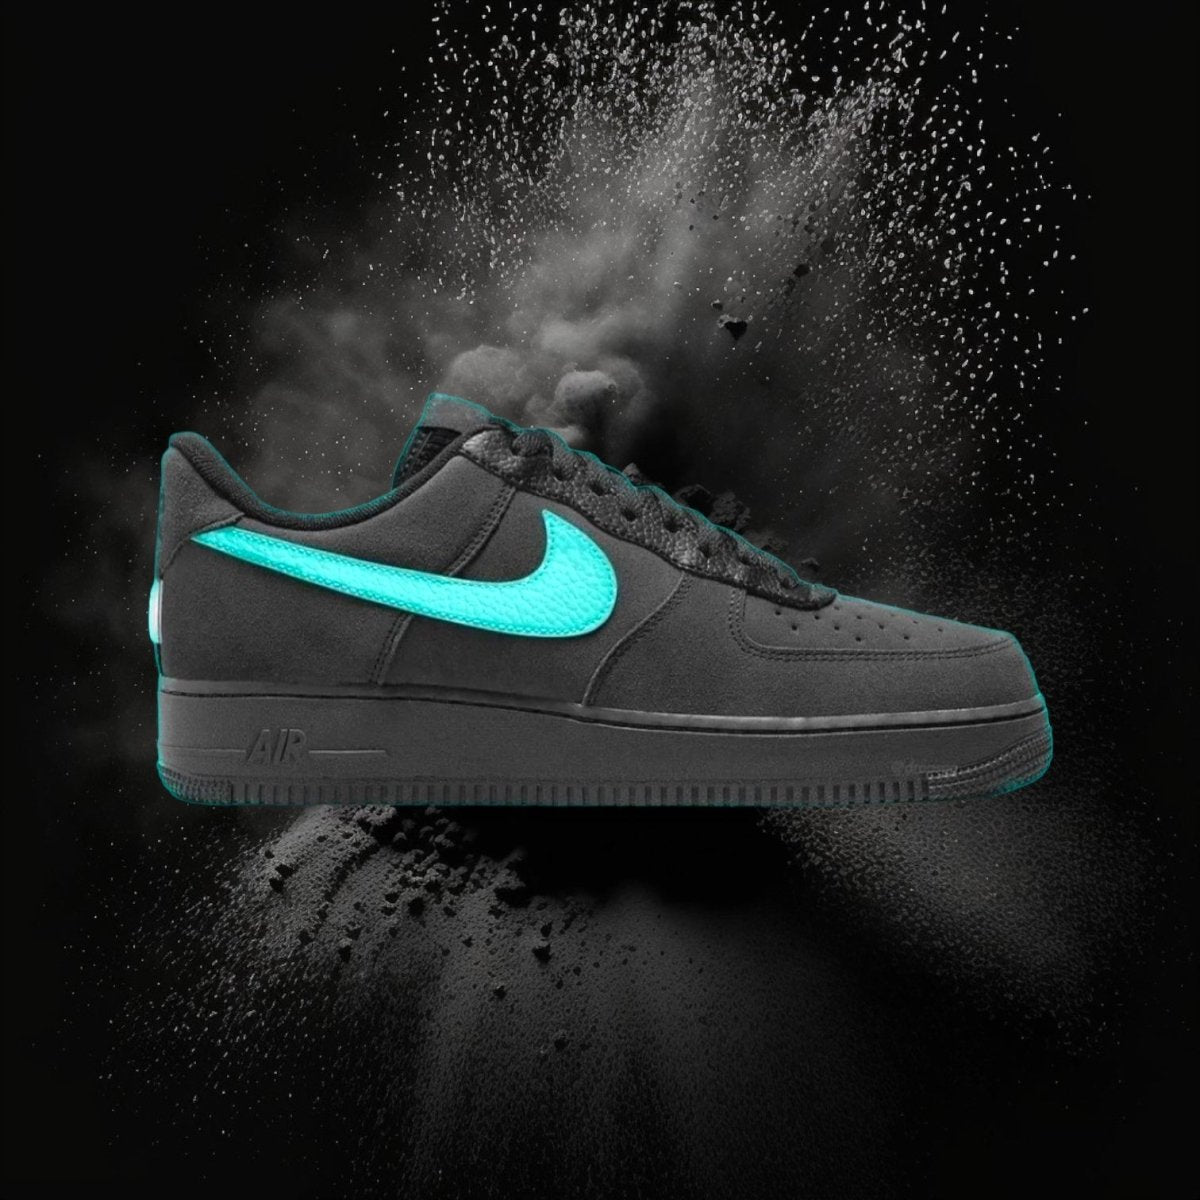 Tiffany & Co. x Air Force 1 Low '1837' - No Box - Low Sneaker - Nike - Jawns on Fire